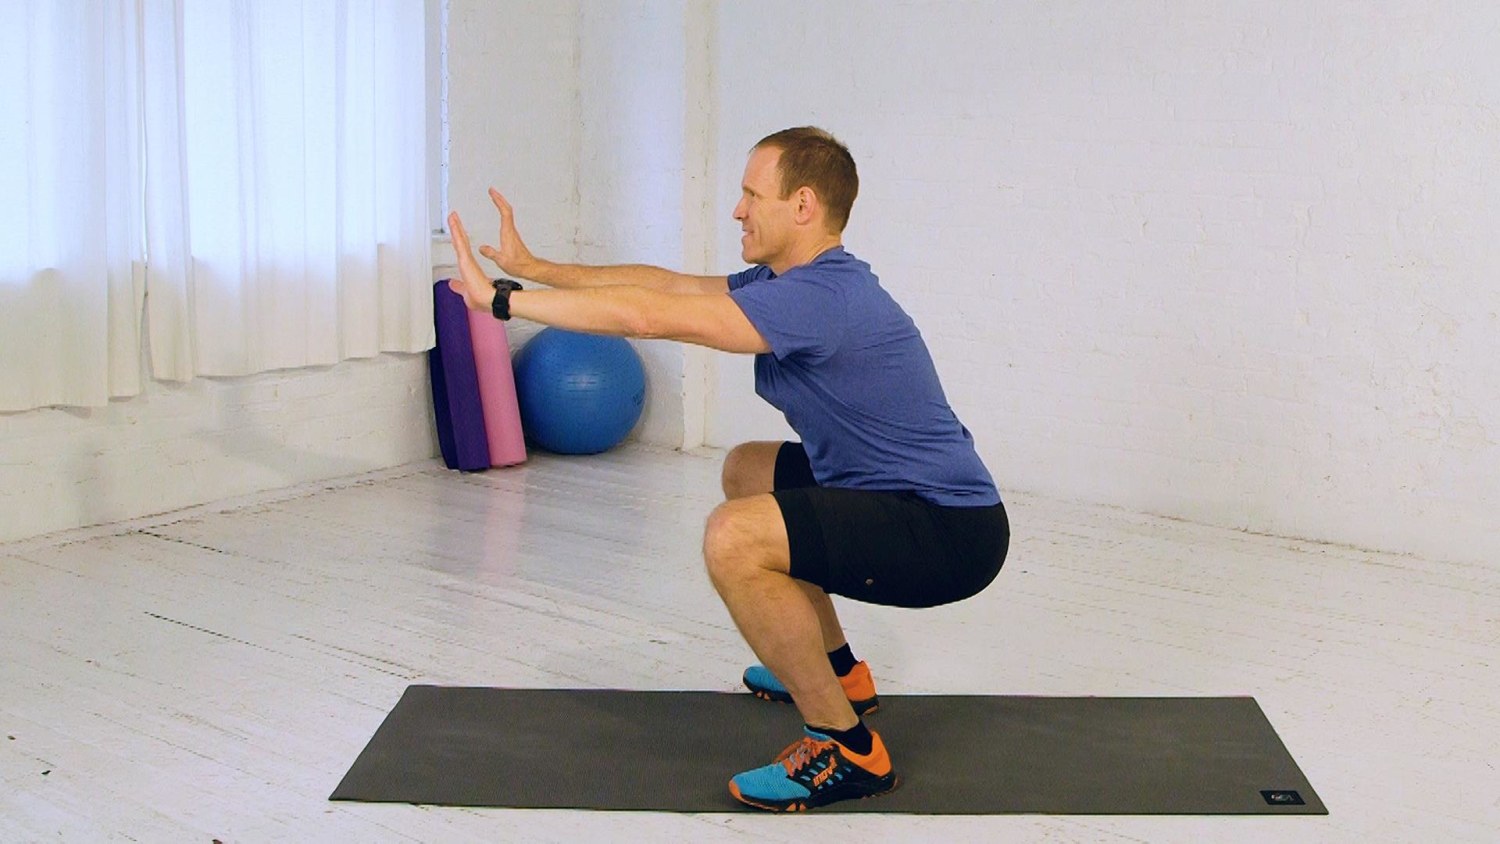 The Deep Squat: The Healthier Way to Rest